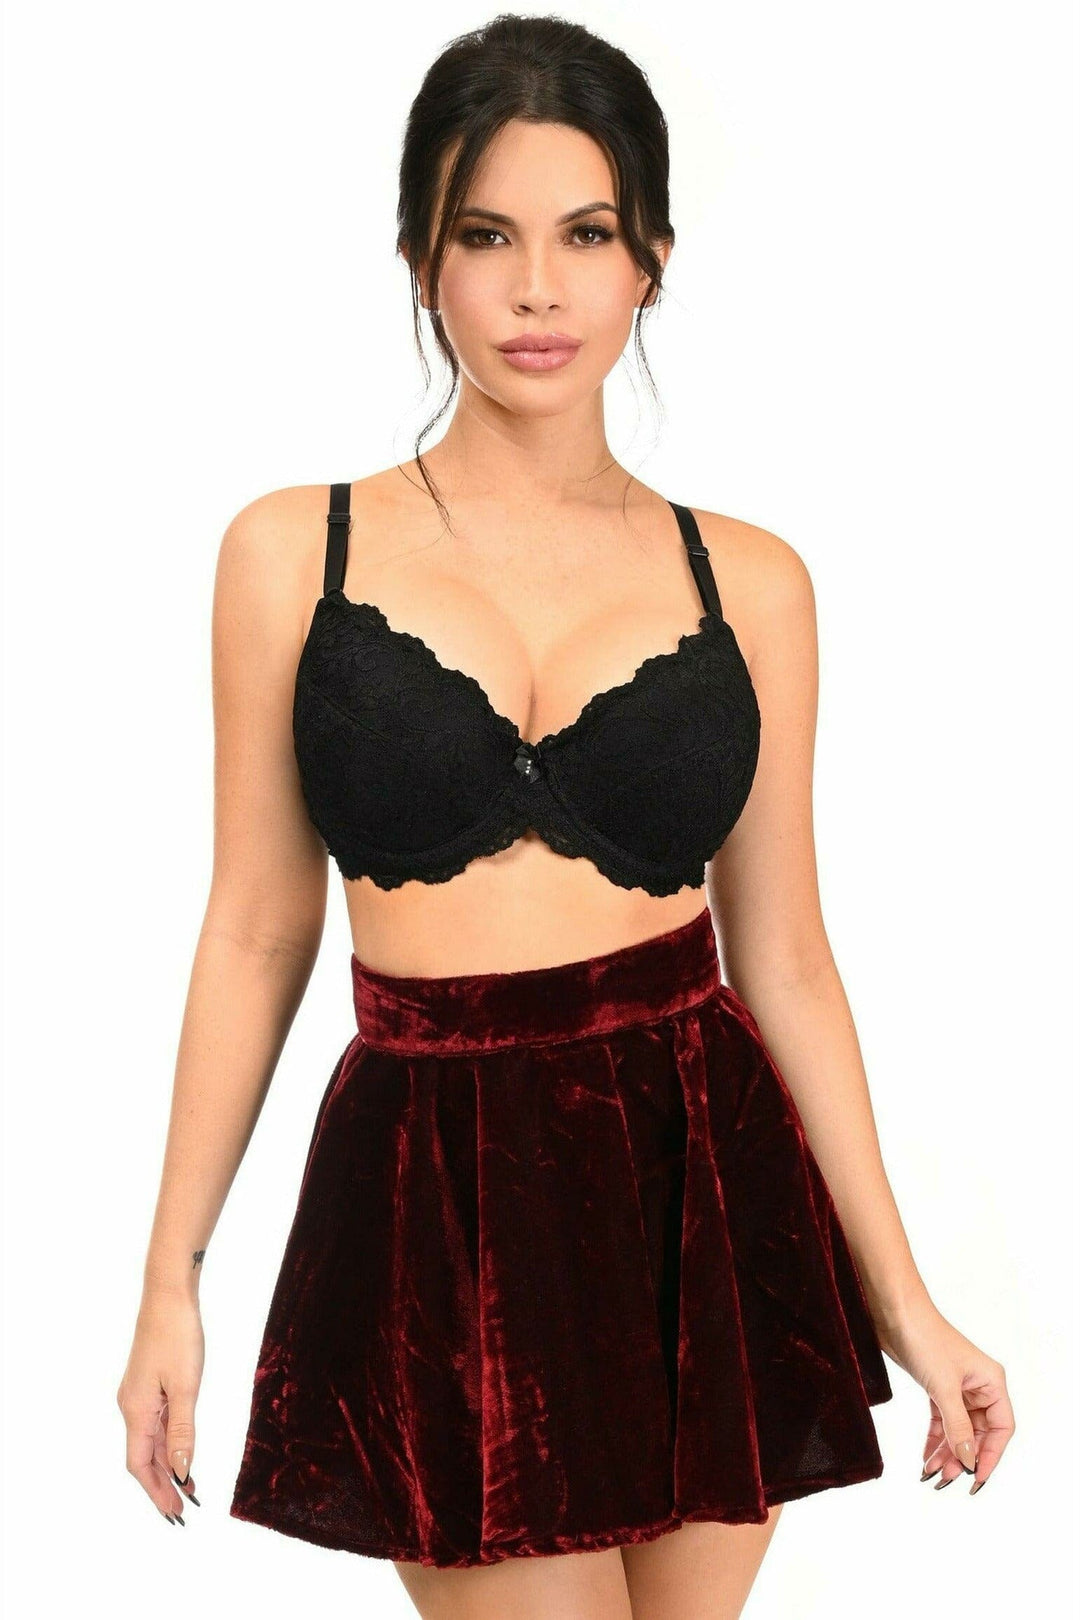 Dark Red Crushed Velvet Skirt-Mini Skirts-Daisy Corsets-Red-S-SEXYSHOES.COM